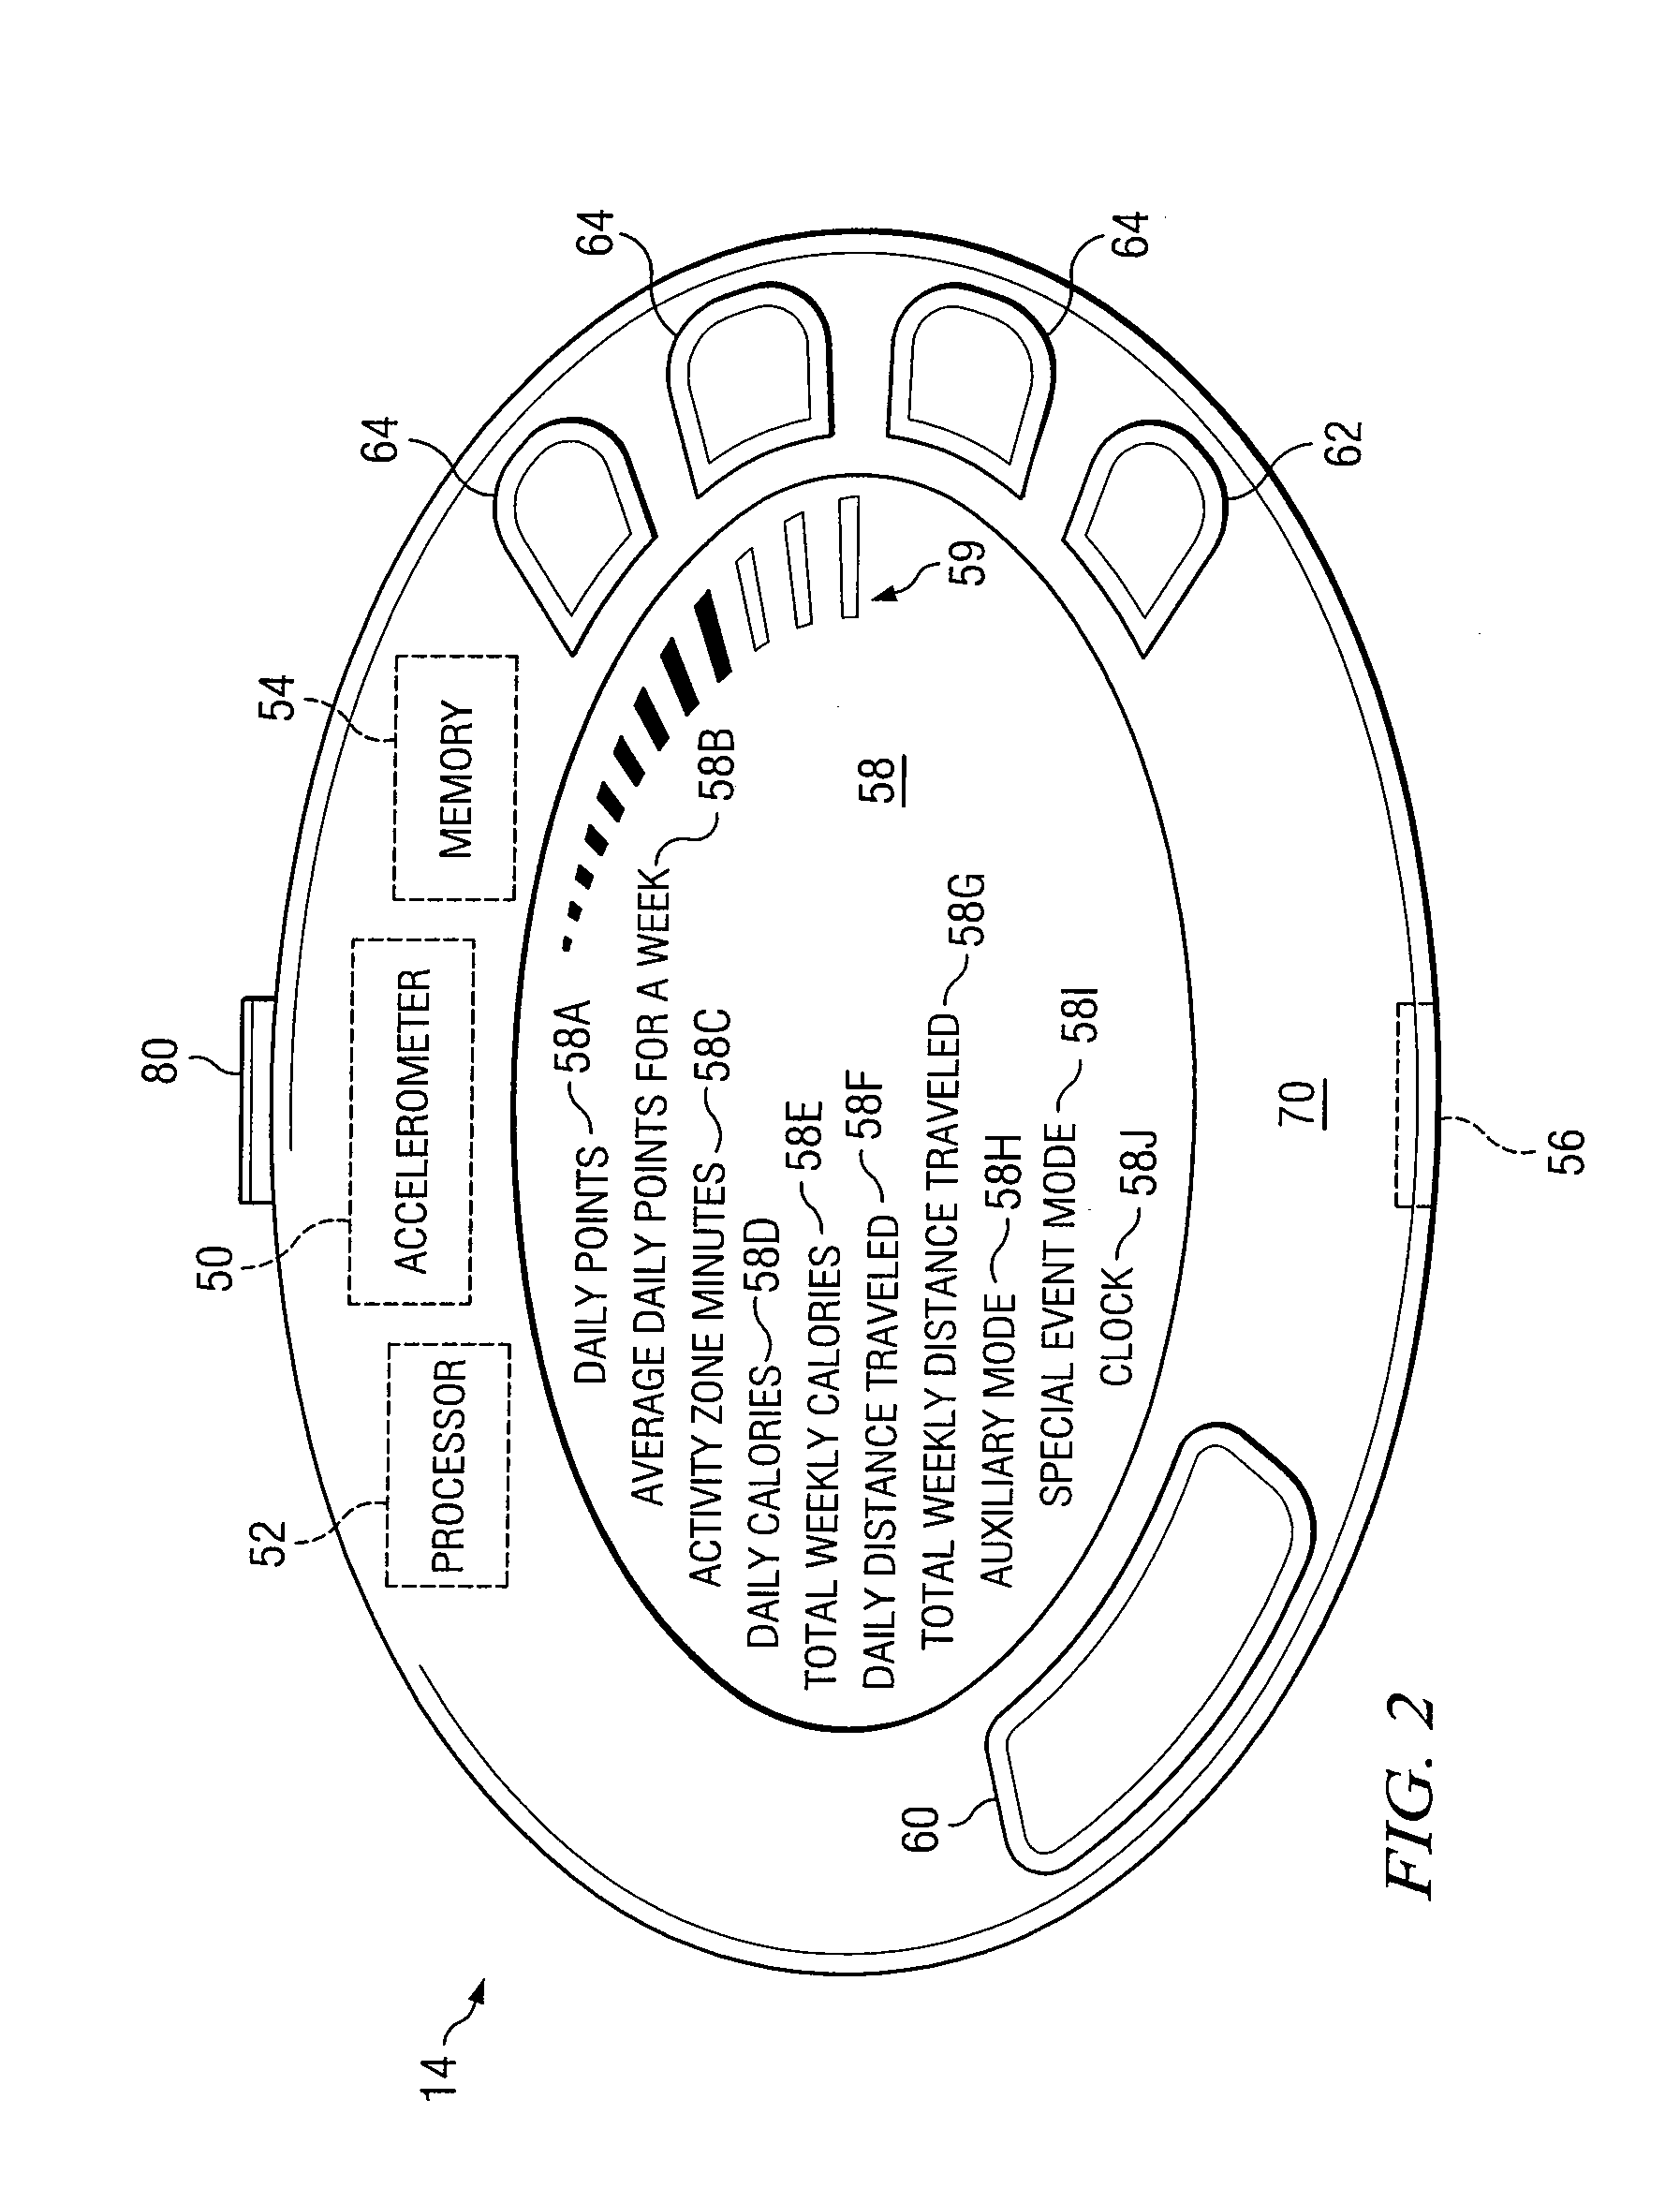 Activity Monitor for Collecting, Converting, Displaying, and Communicating Data